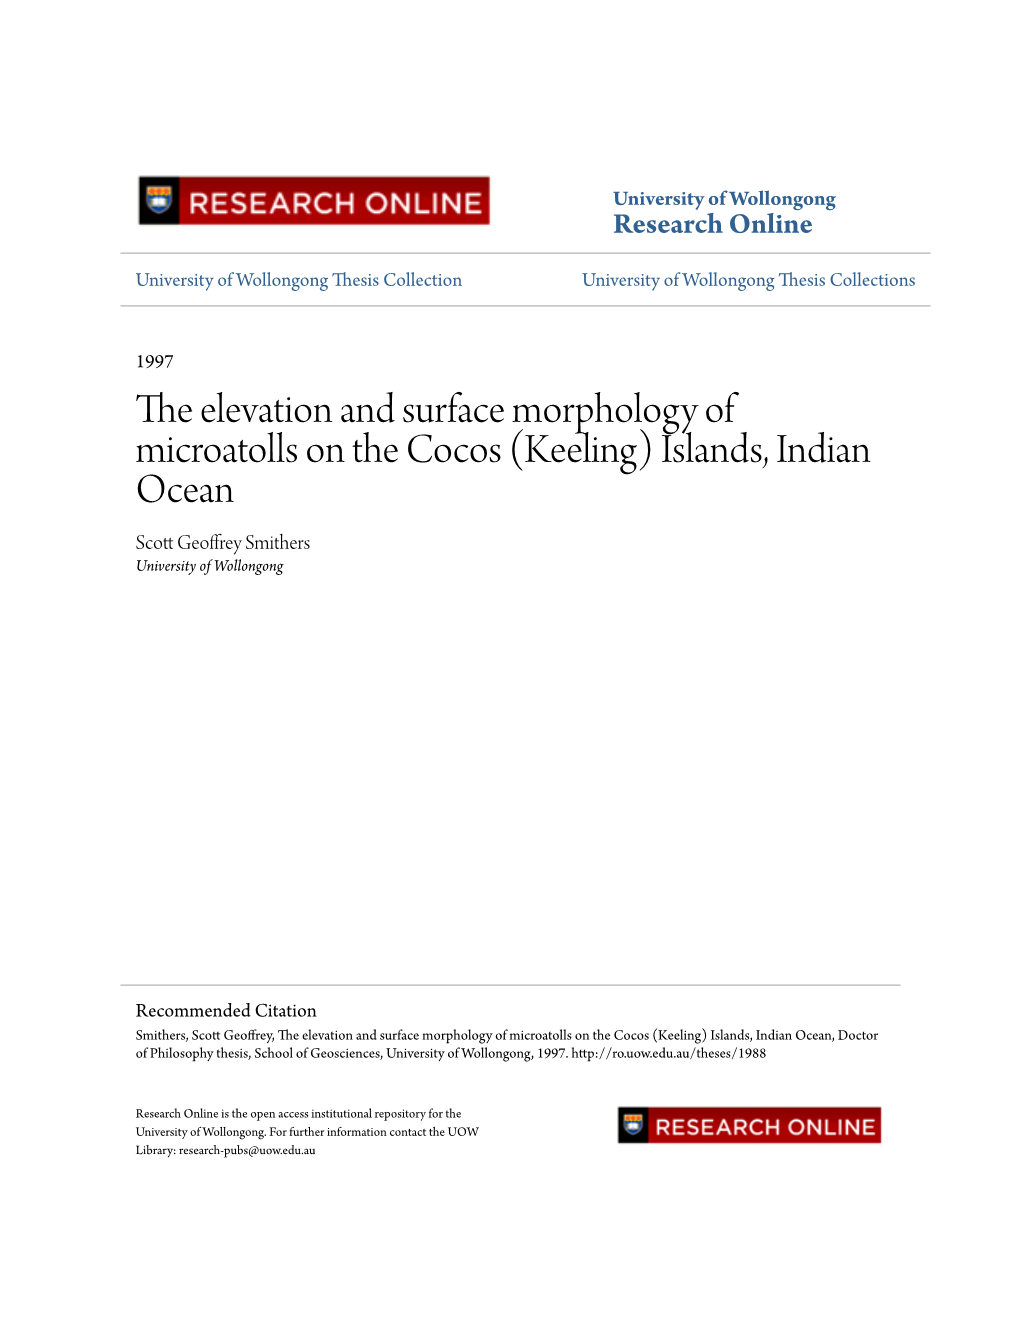 The Elevation and Surface Morphology of Microatolls on the Cocos (Keeling) Islands, Indian Ocean Scott Geoffrey Smithers University of Wollongong